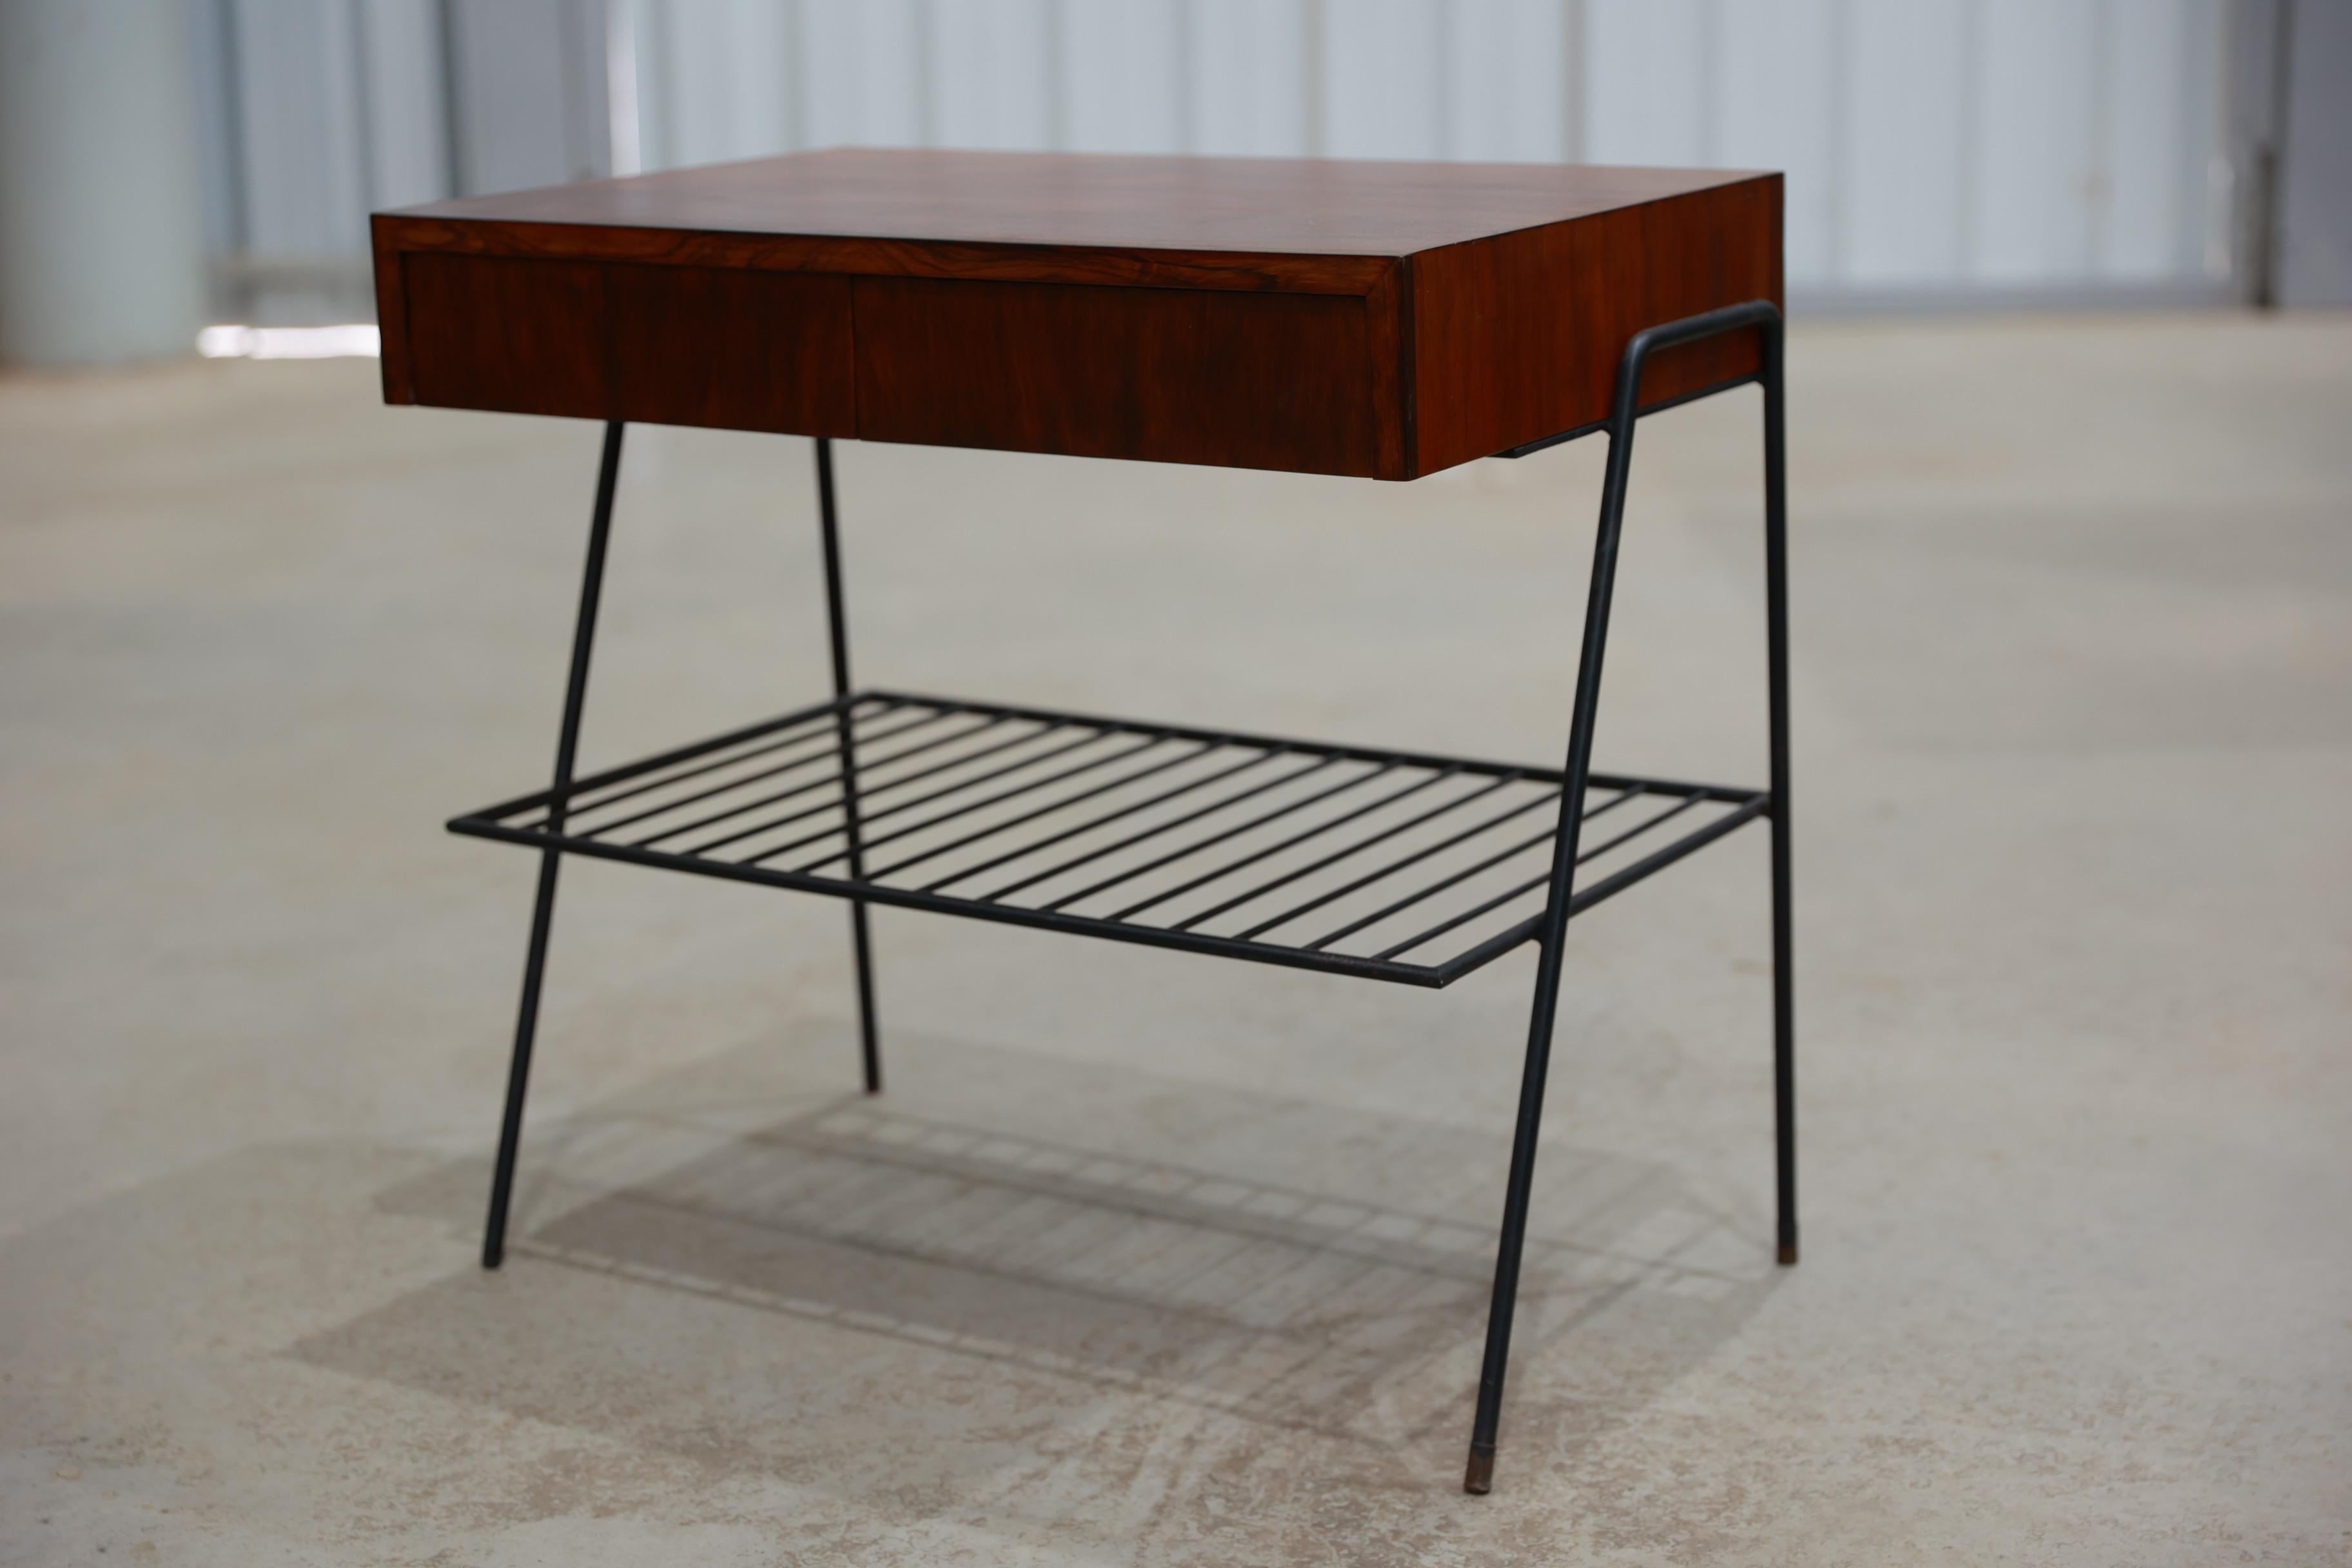 Brazilian Modern Side table in Hardwood and Metal, Unknown, c. 1950 For Sale 8